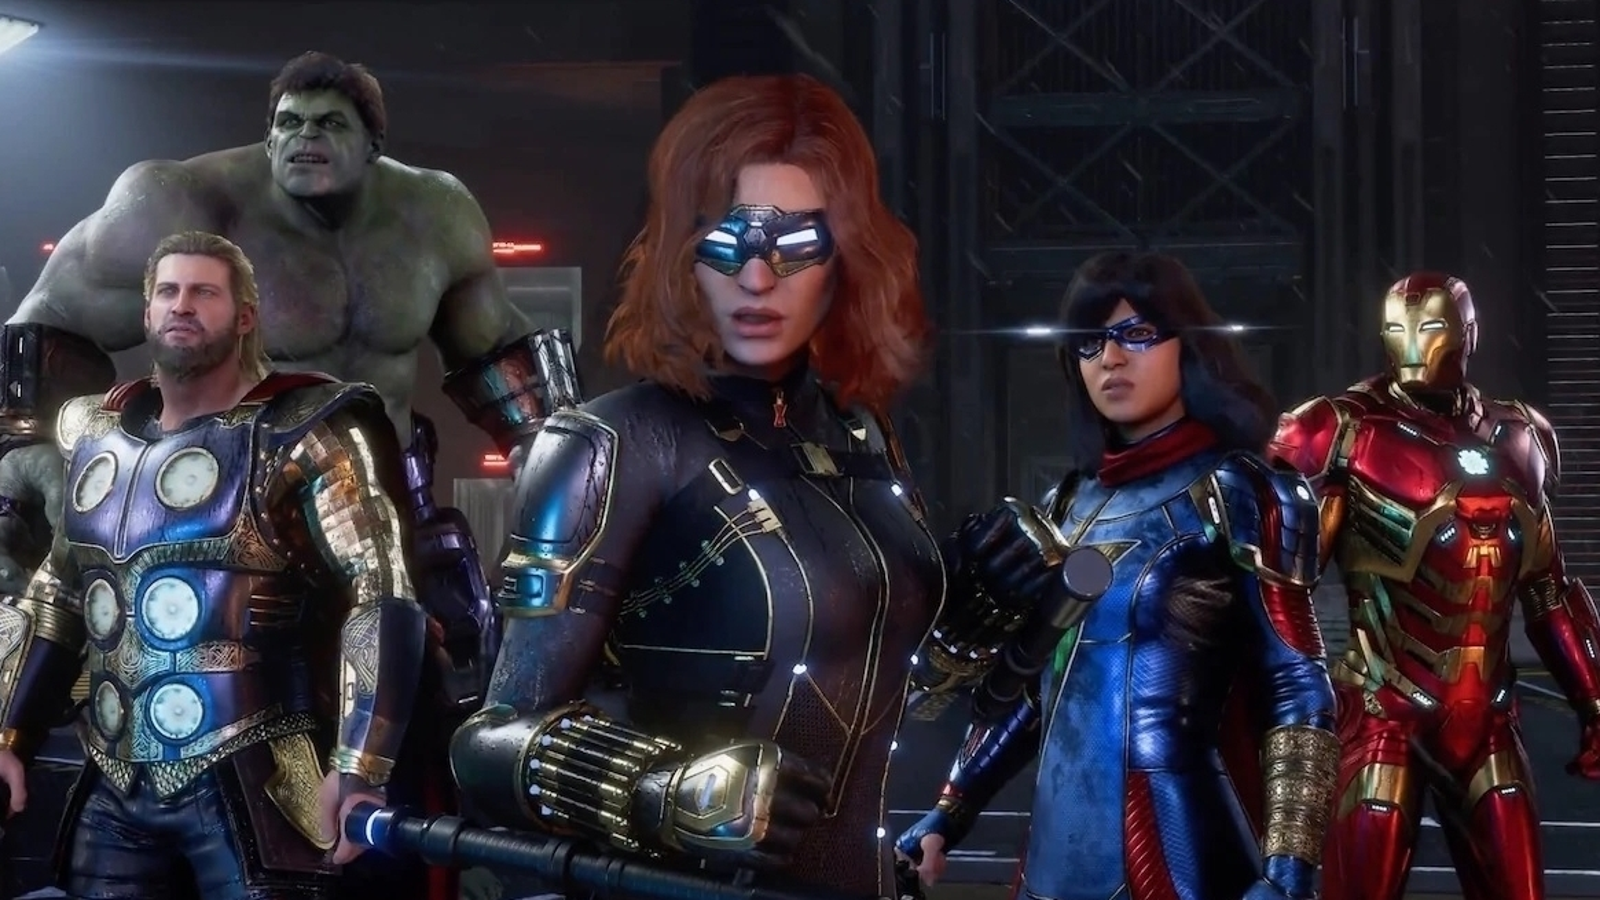 https://assetsio.gnwcdn.com/marvels-avengers-game-characters-playable-change-cast-7039-1599218991989.jpg?width=1600&height=900&fit=crop&quality=100&format=png&enable=upscale&auto=webp